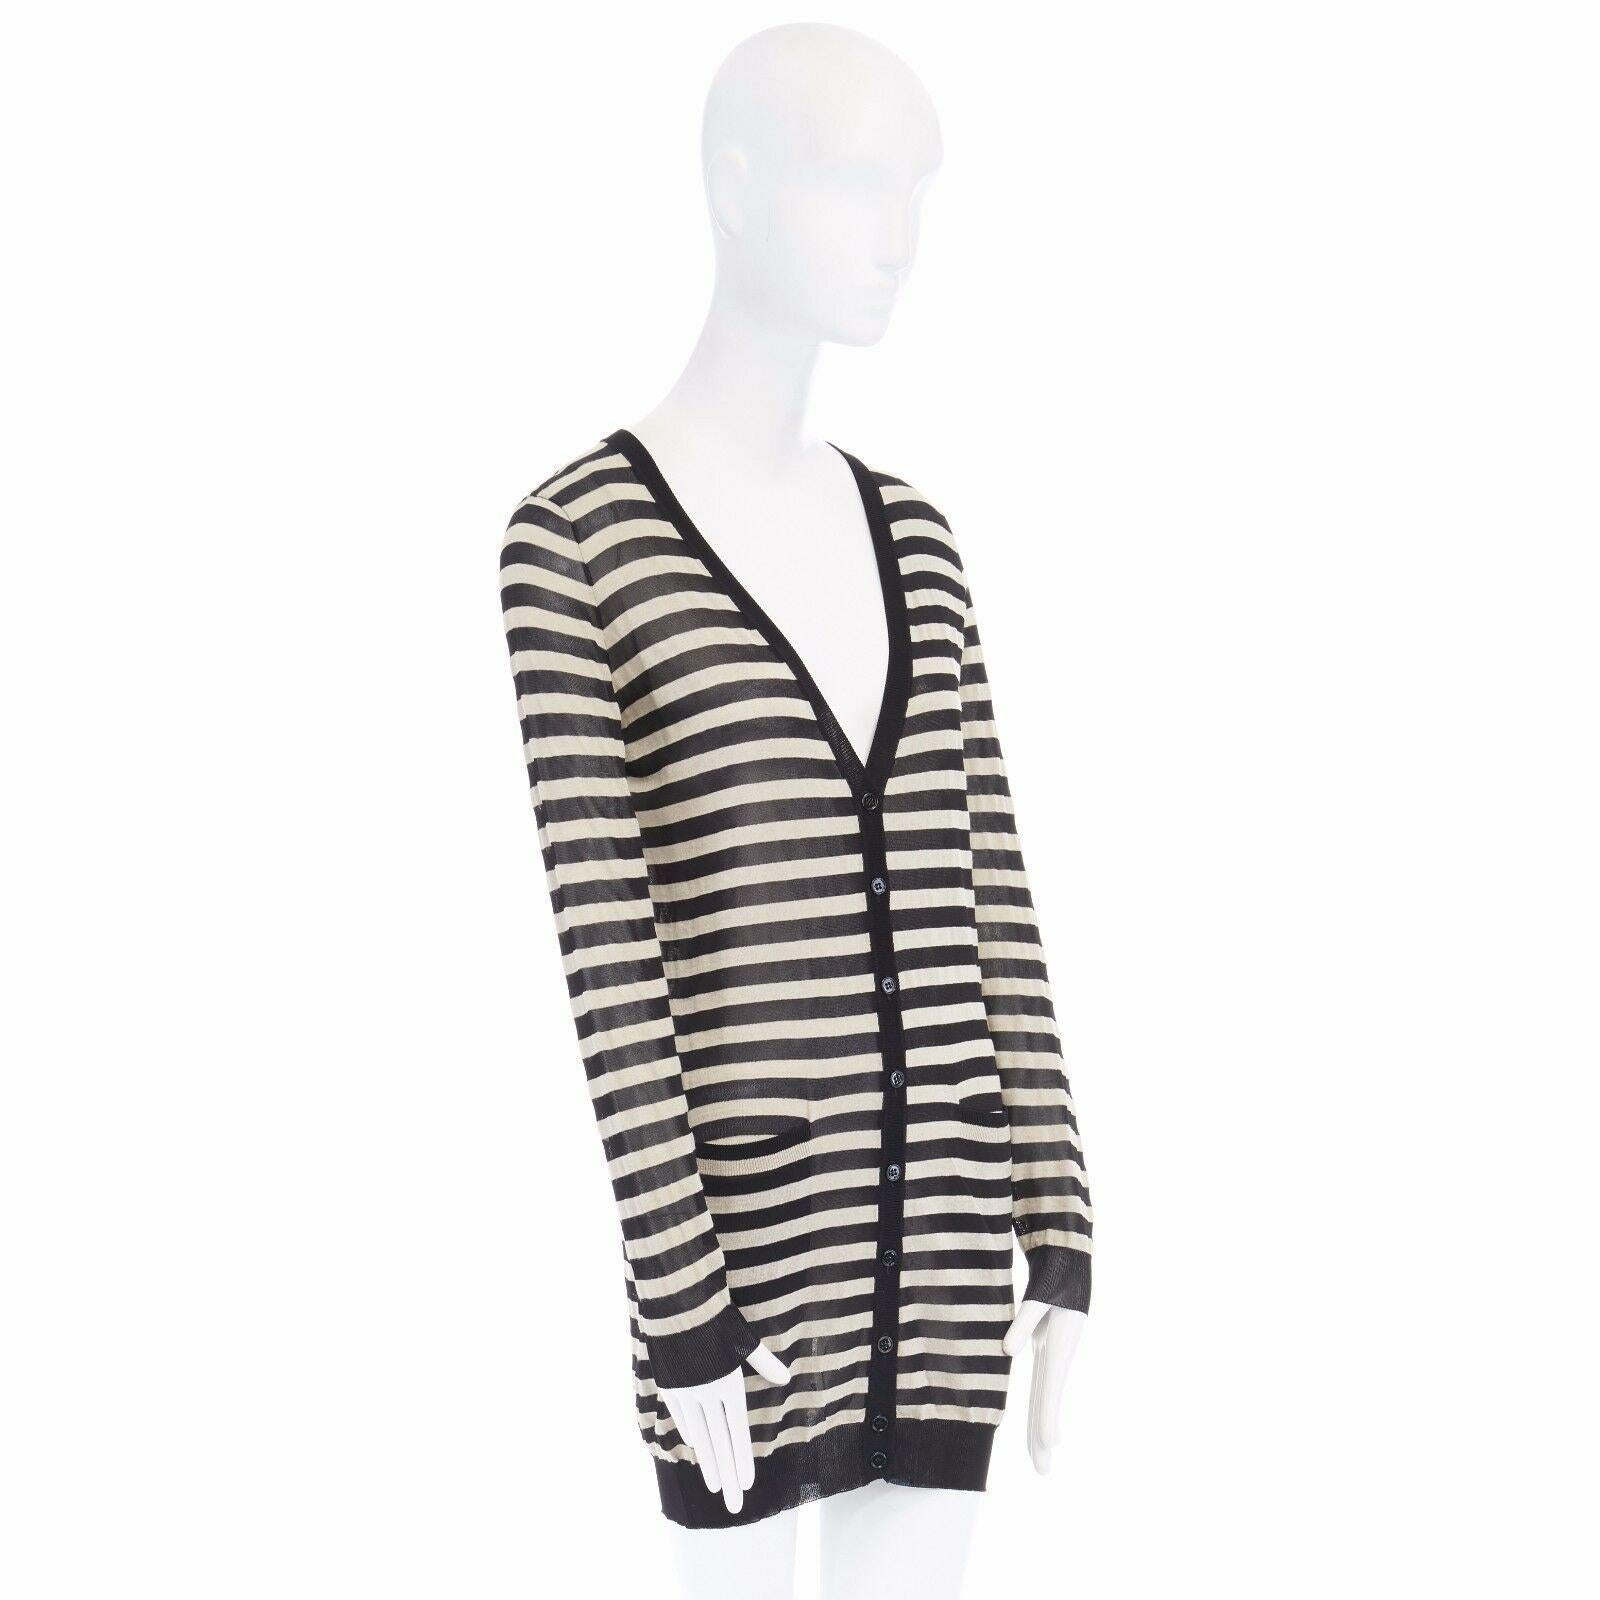 DOLCE GABBANA DG beige black striped fine knit long cardigan IT38 US0 XS Reference: LNKO/A00349 
Brand: Dolce Gabbana 
Designer: Domenico Dolce and Stefano Gabbana 
Material: Linen 
Color: Beige 
Pattern: Striped 
Closure: Button 
Extra Detail: